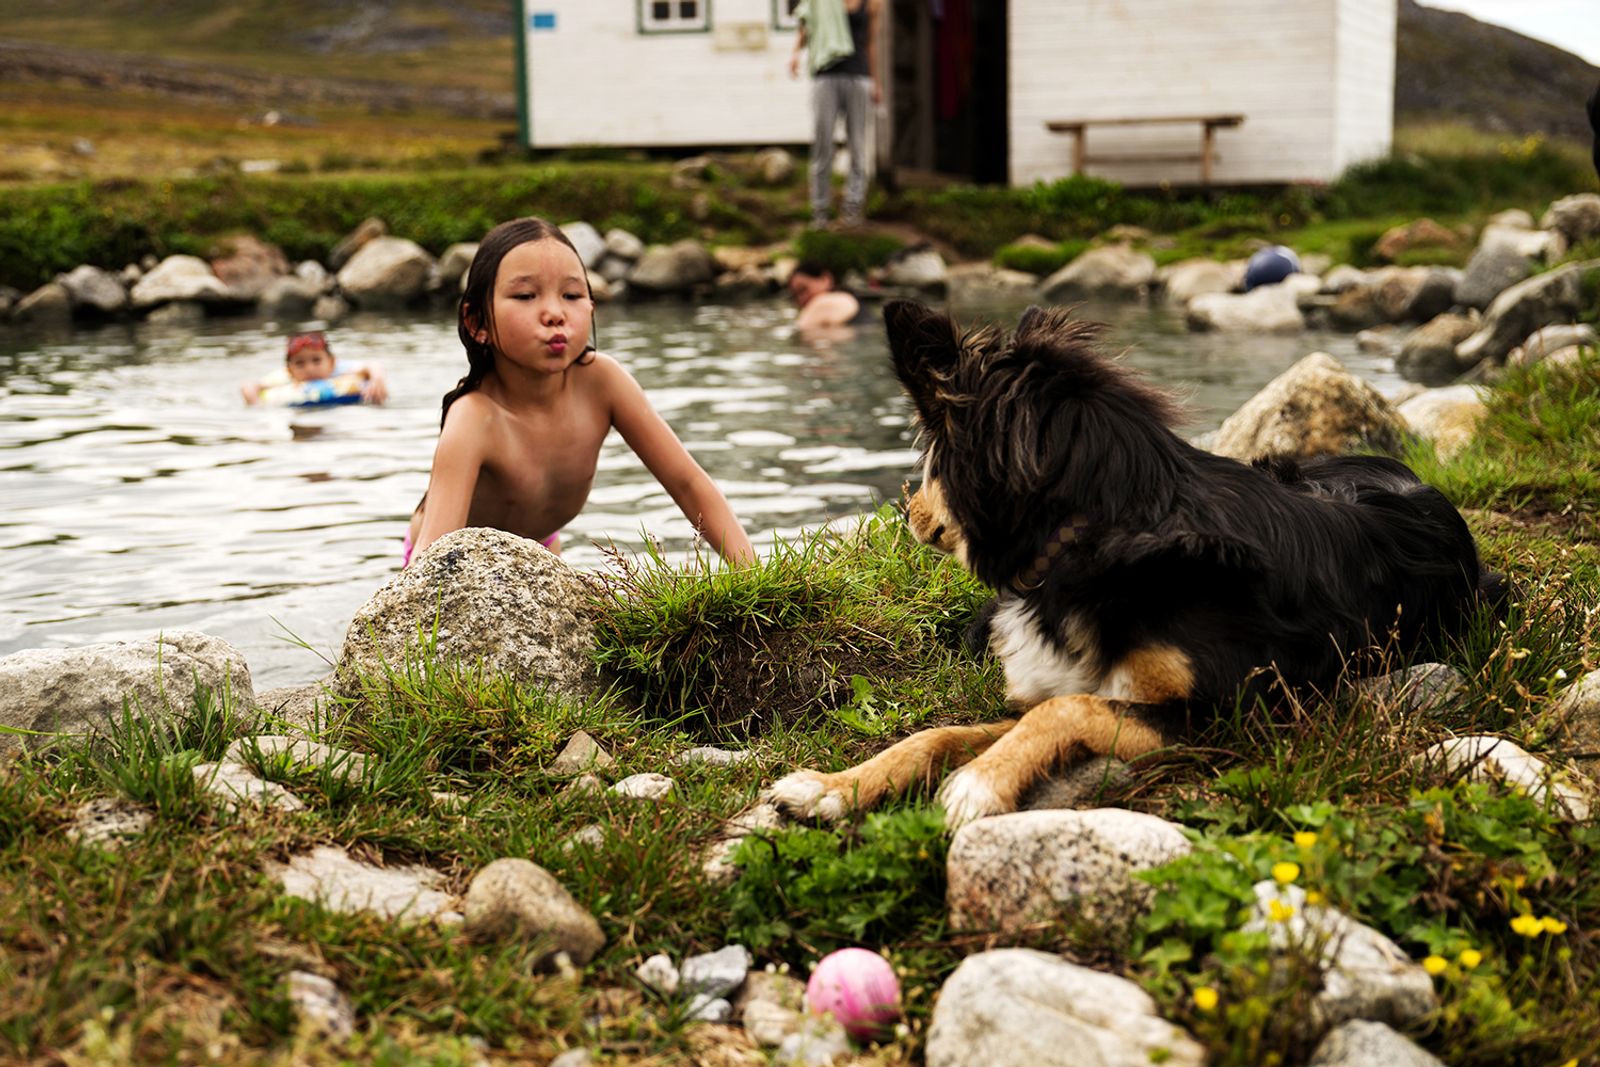 © Jolie Luo - Image from the Greenland Lost Dreams photography project